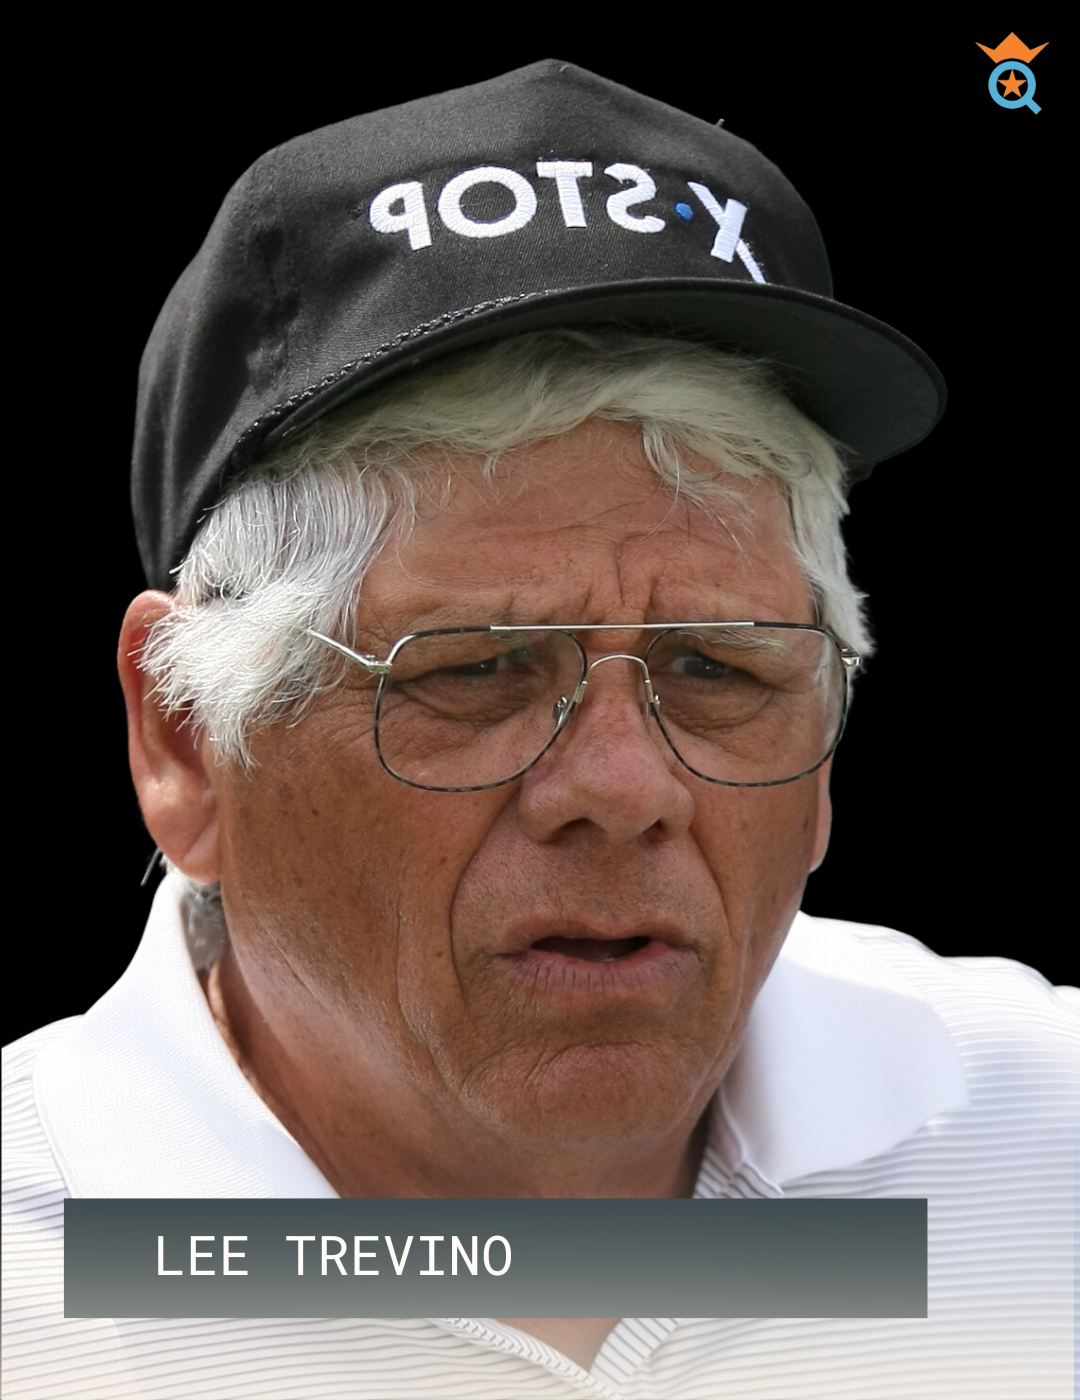 Best Golf Players of All Time, Lee Trevino